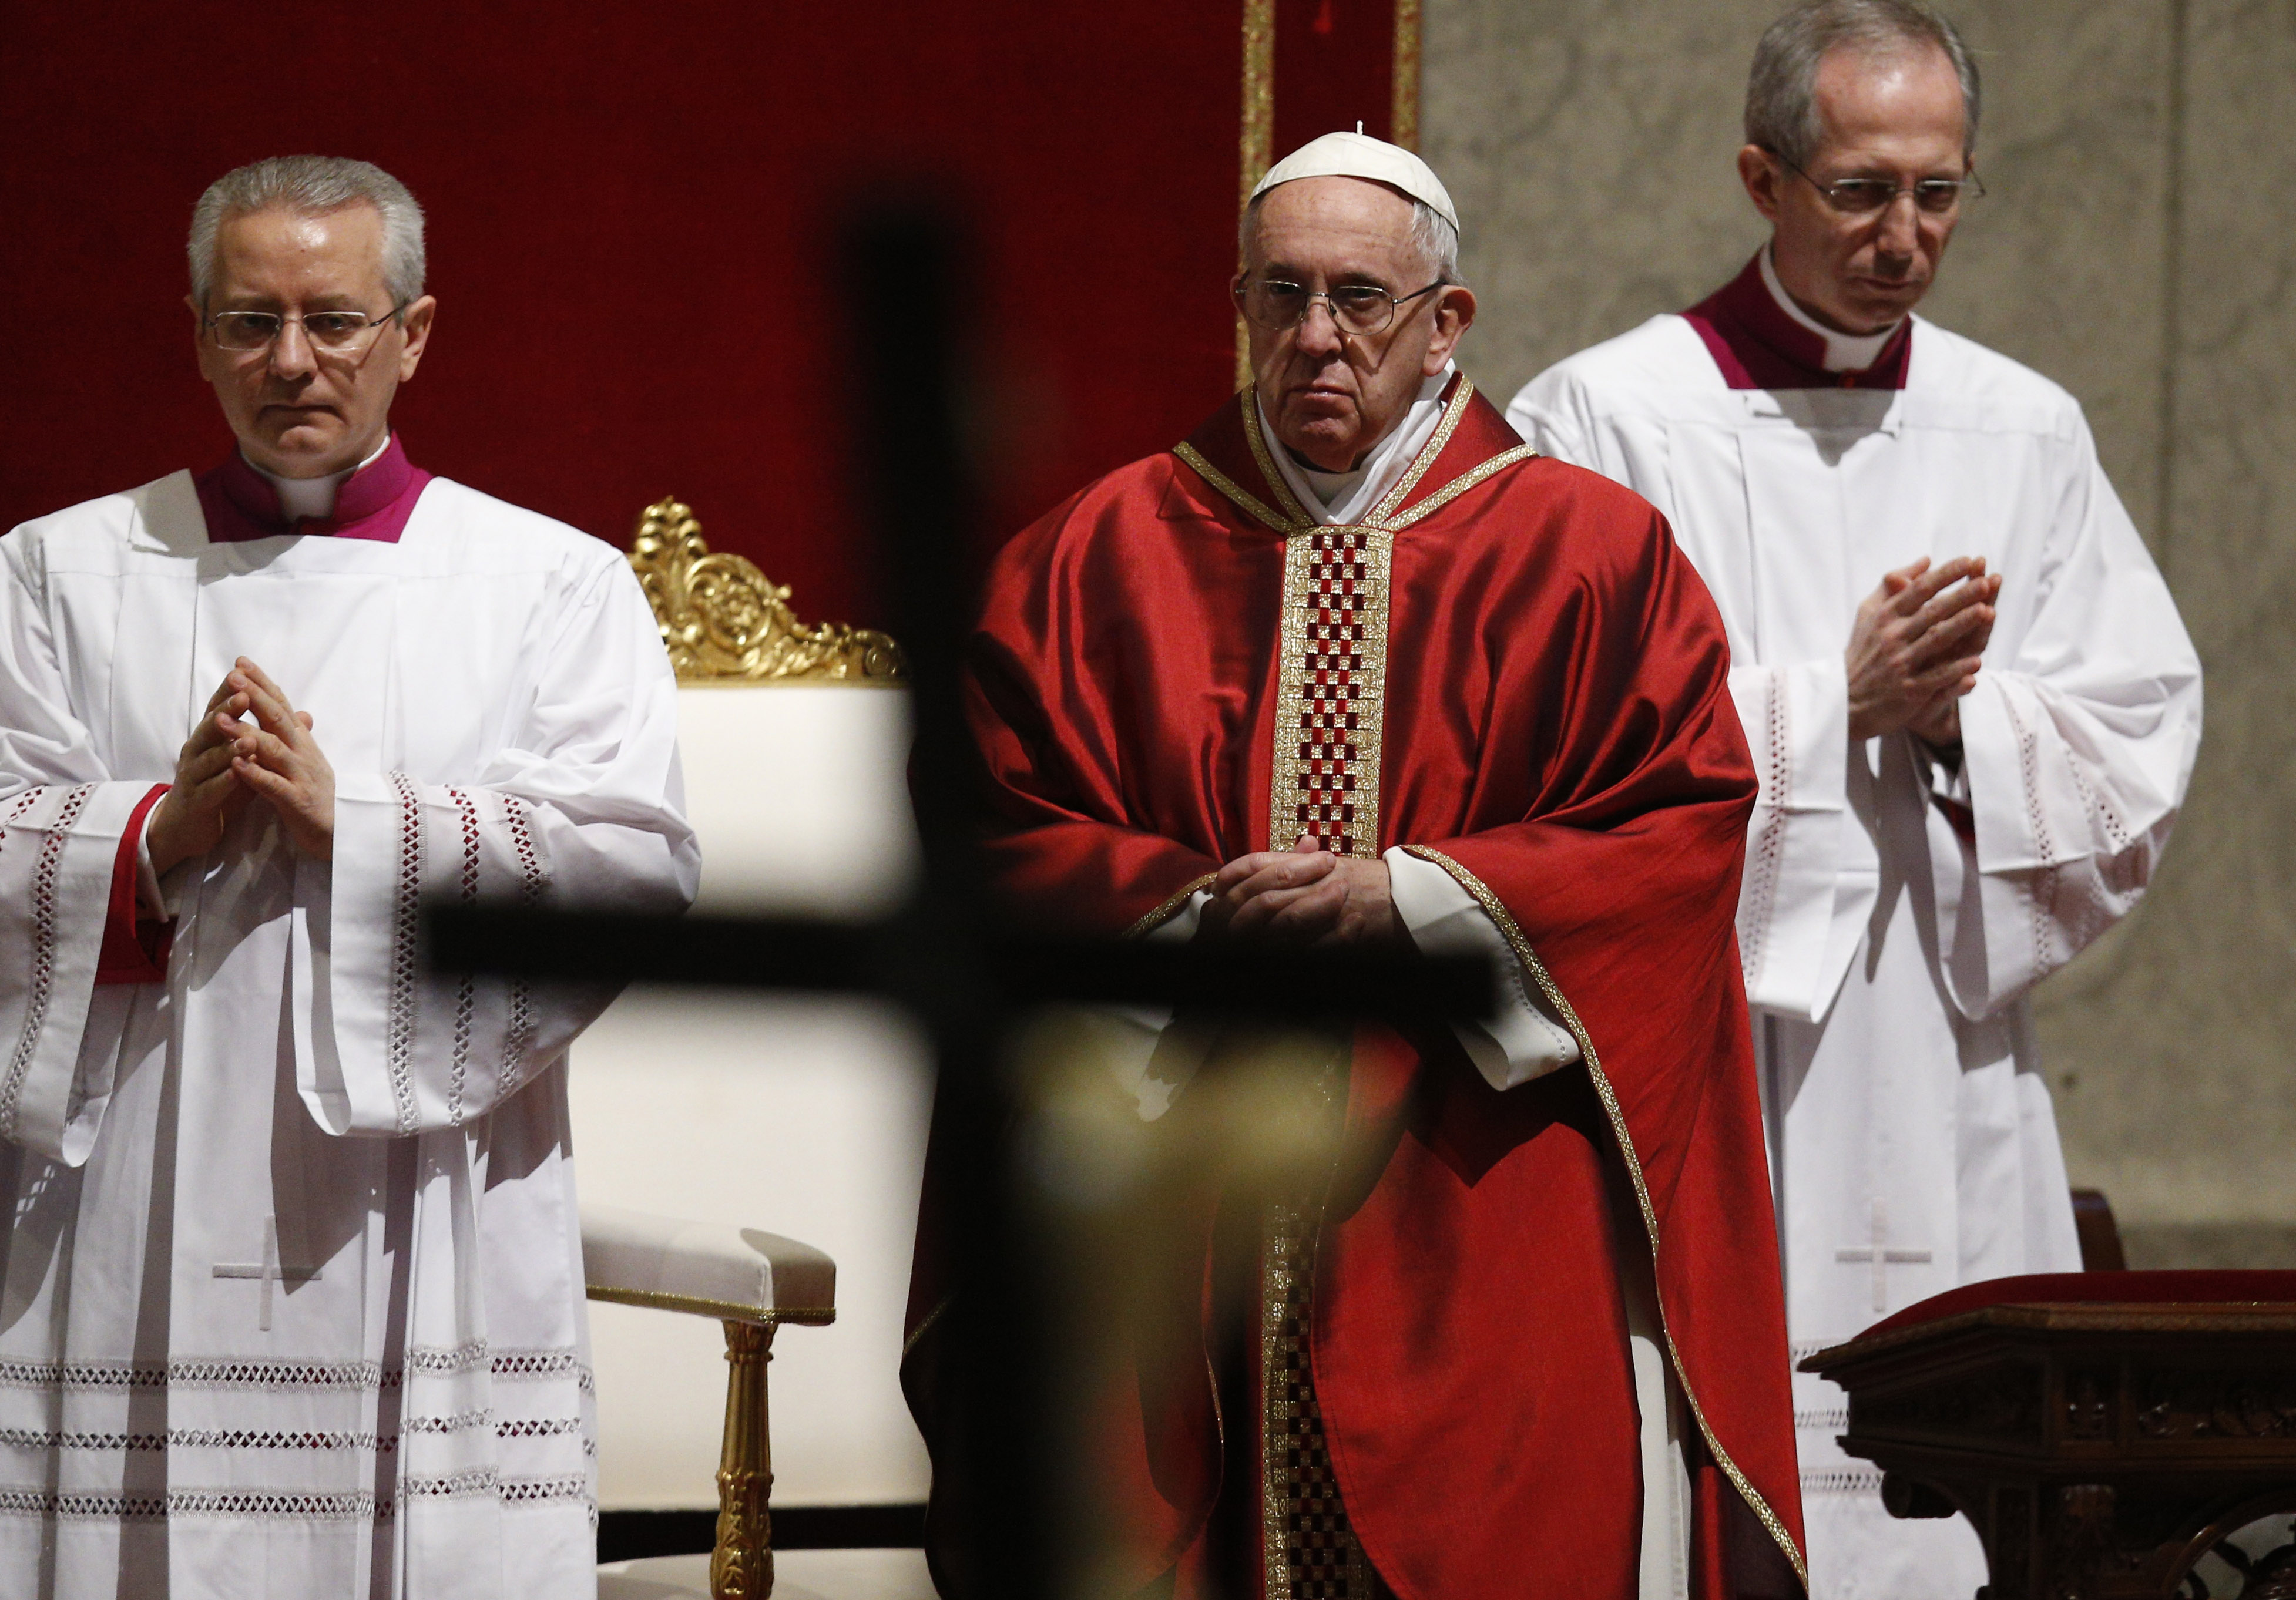 Pope: Jesus' church offers truth, despite efforts to discredit it